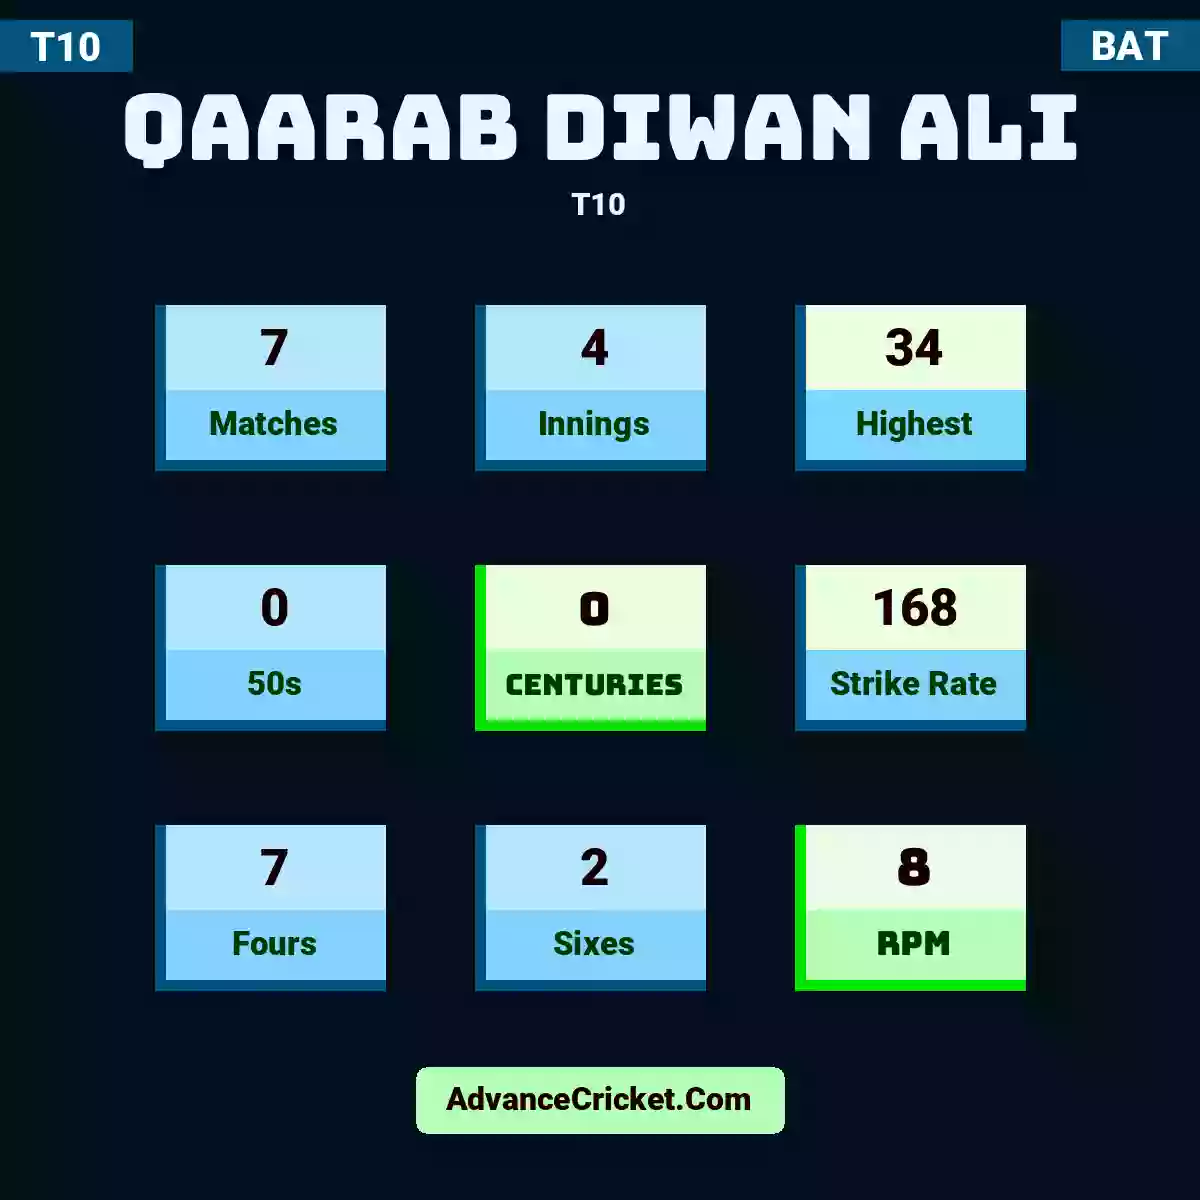 Qaarab Diwan Ali T10 , Qaarab Diwan Ali played 7 matches, scored 34 runs as highest, 0 half-centuries, and 0 centuries, with a strike rate of 168. Q.Diwan.Ali hit 7 fours and 2 sixes, with an RPM of 8.